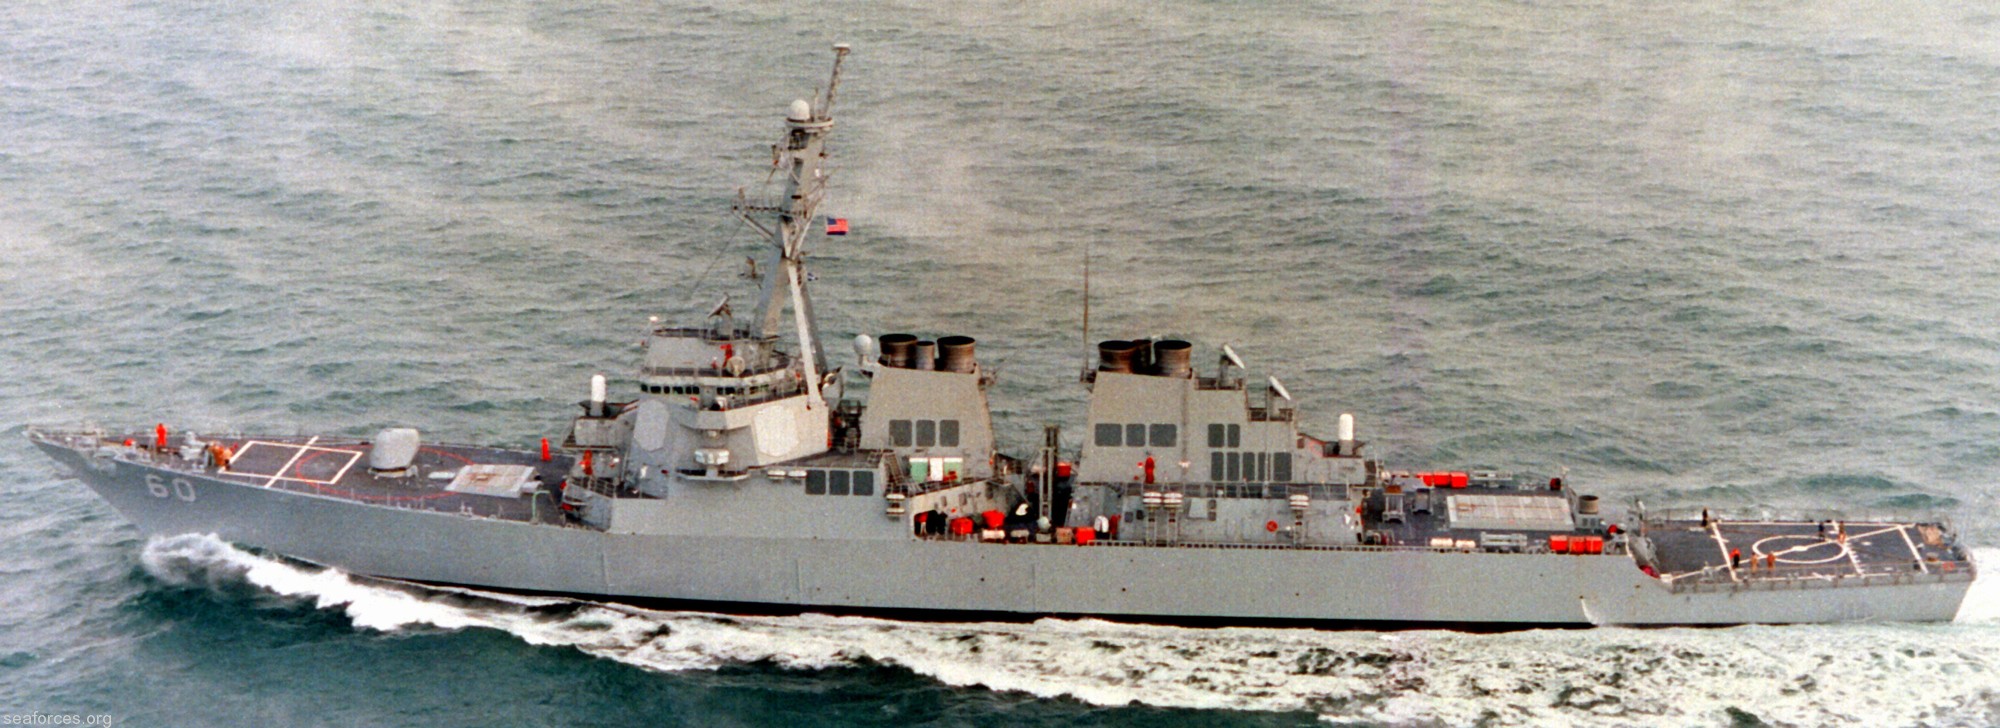 ddg-60 uss paul hamilton guided missile destroyer us navy 50